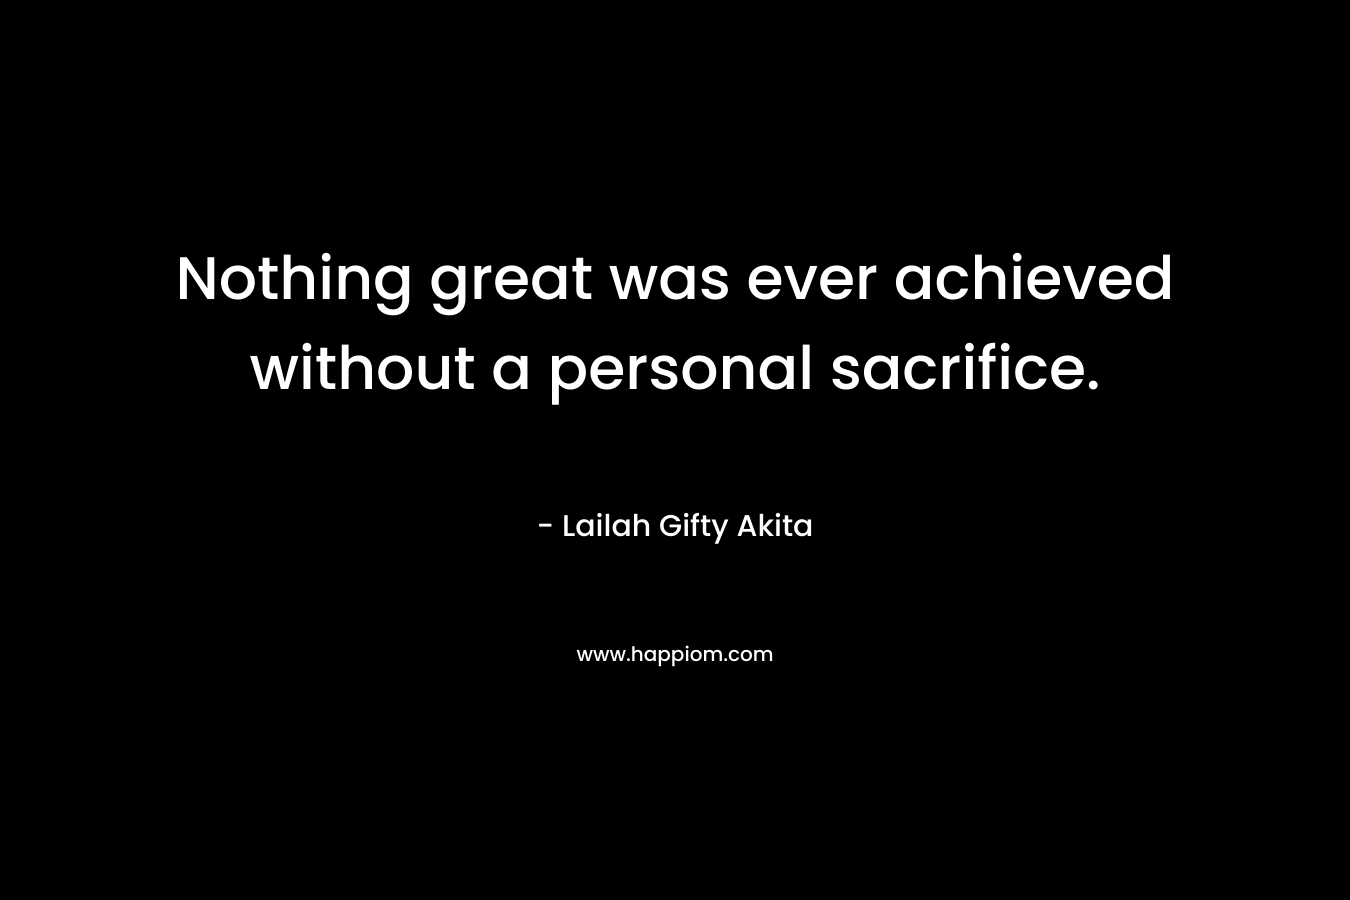 Nothing great was ever achieved without a personal sacrifice.